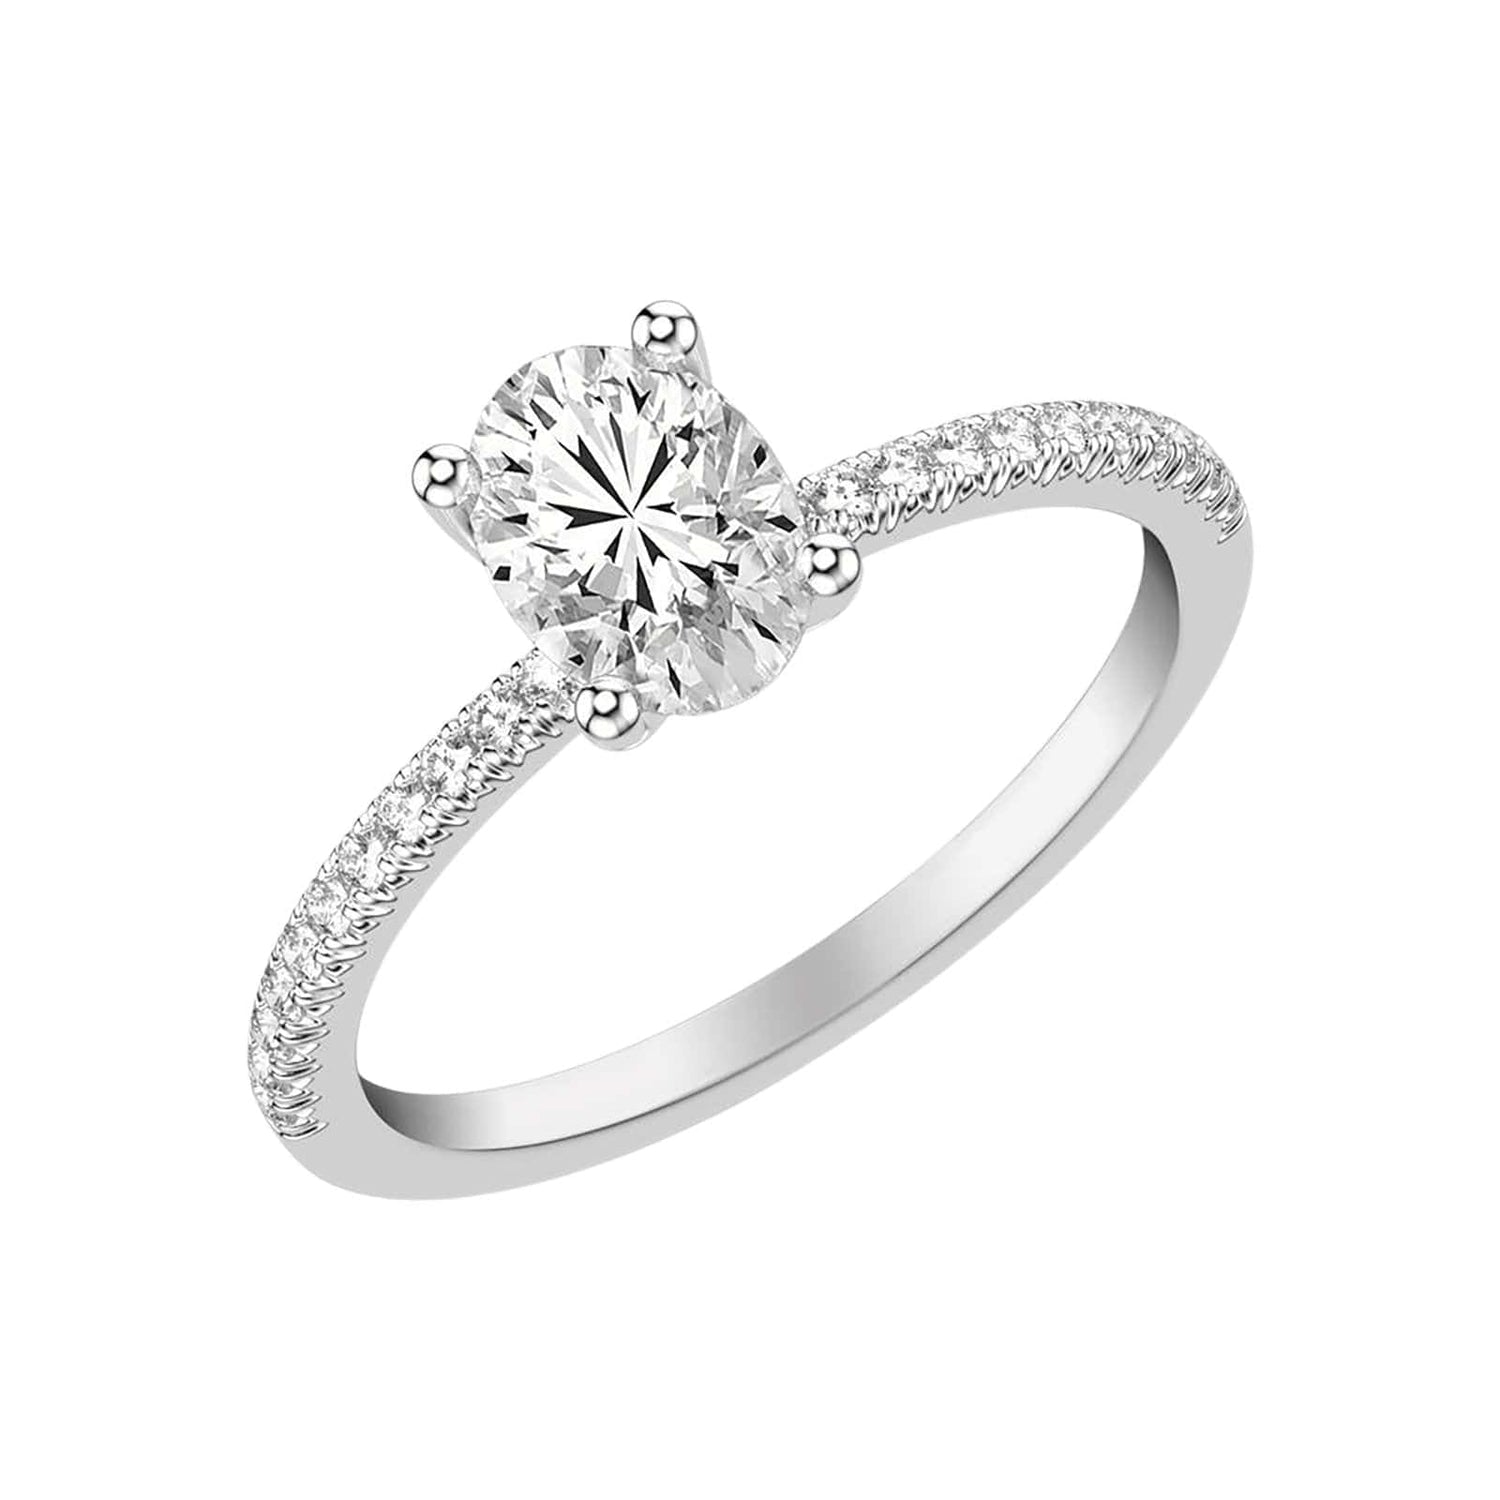 Come see these trending styles in person at our Sawmill Road location in  Dublin, Ohio! Engagement Rin… | Diamond wedding rings, Eternity band diamond,  Wedding rings